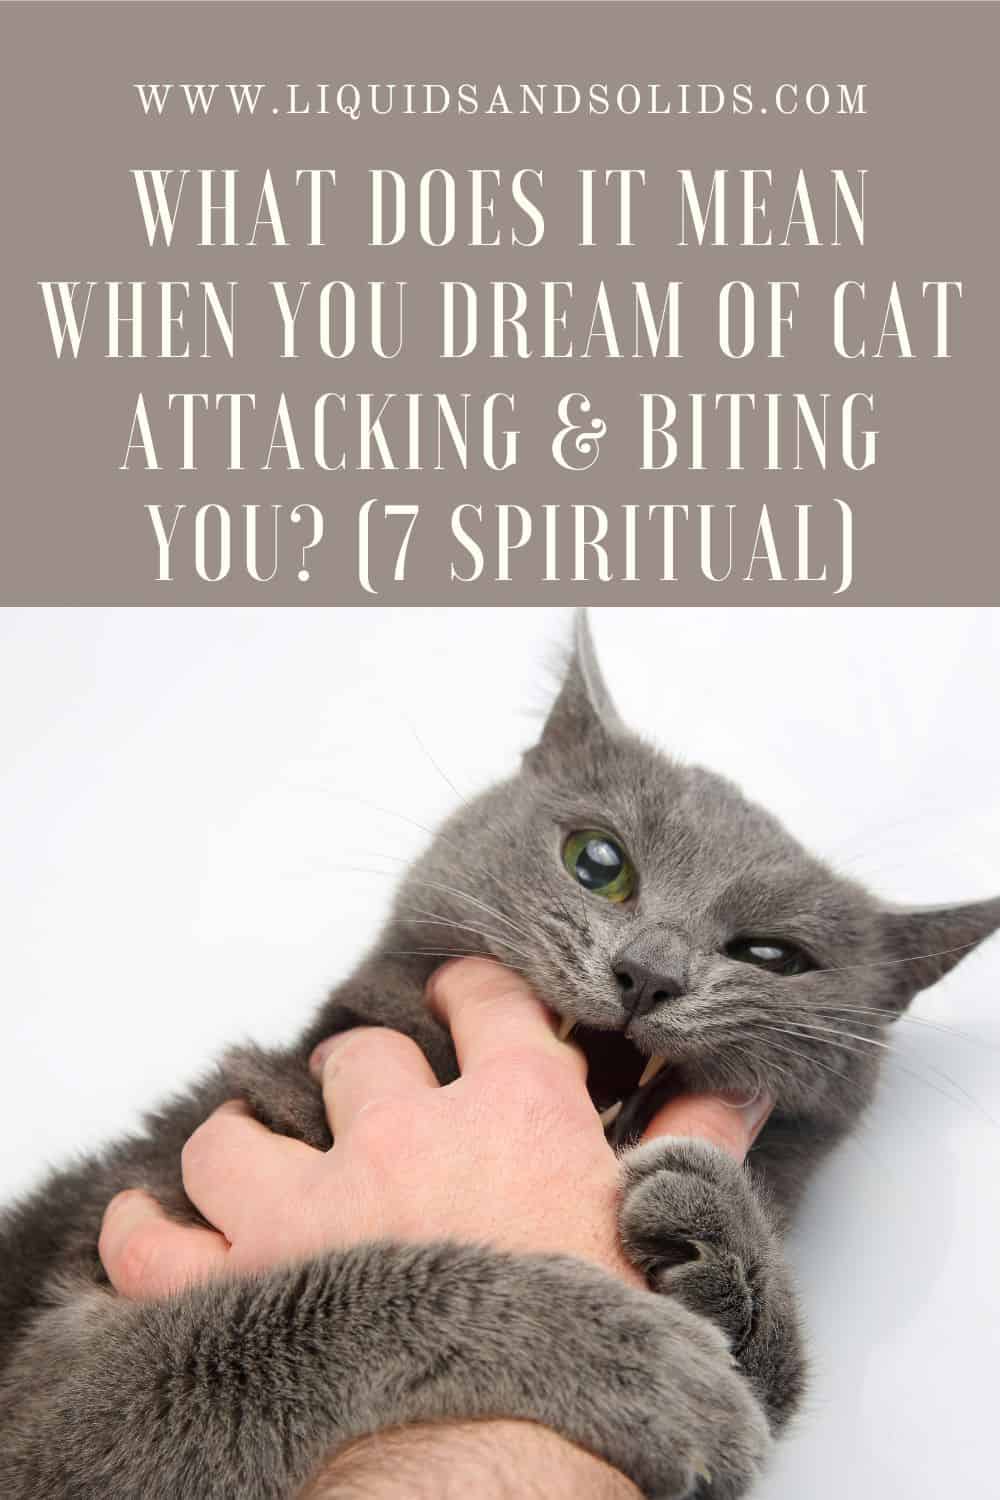 What Does It Mean When You Dream Of Cat Attacking And Biting You (7 Spiritual)